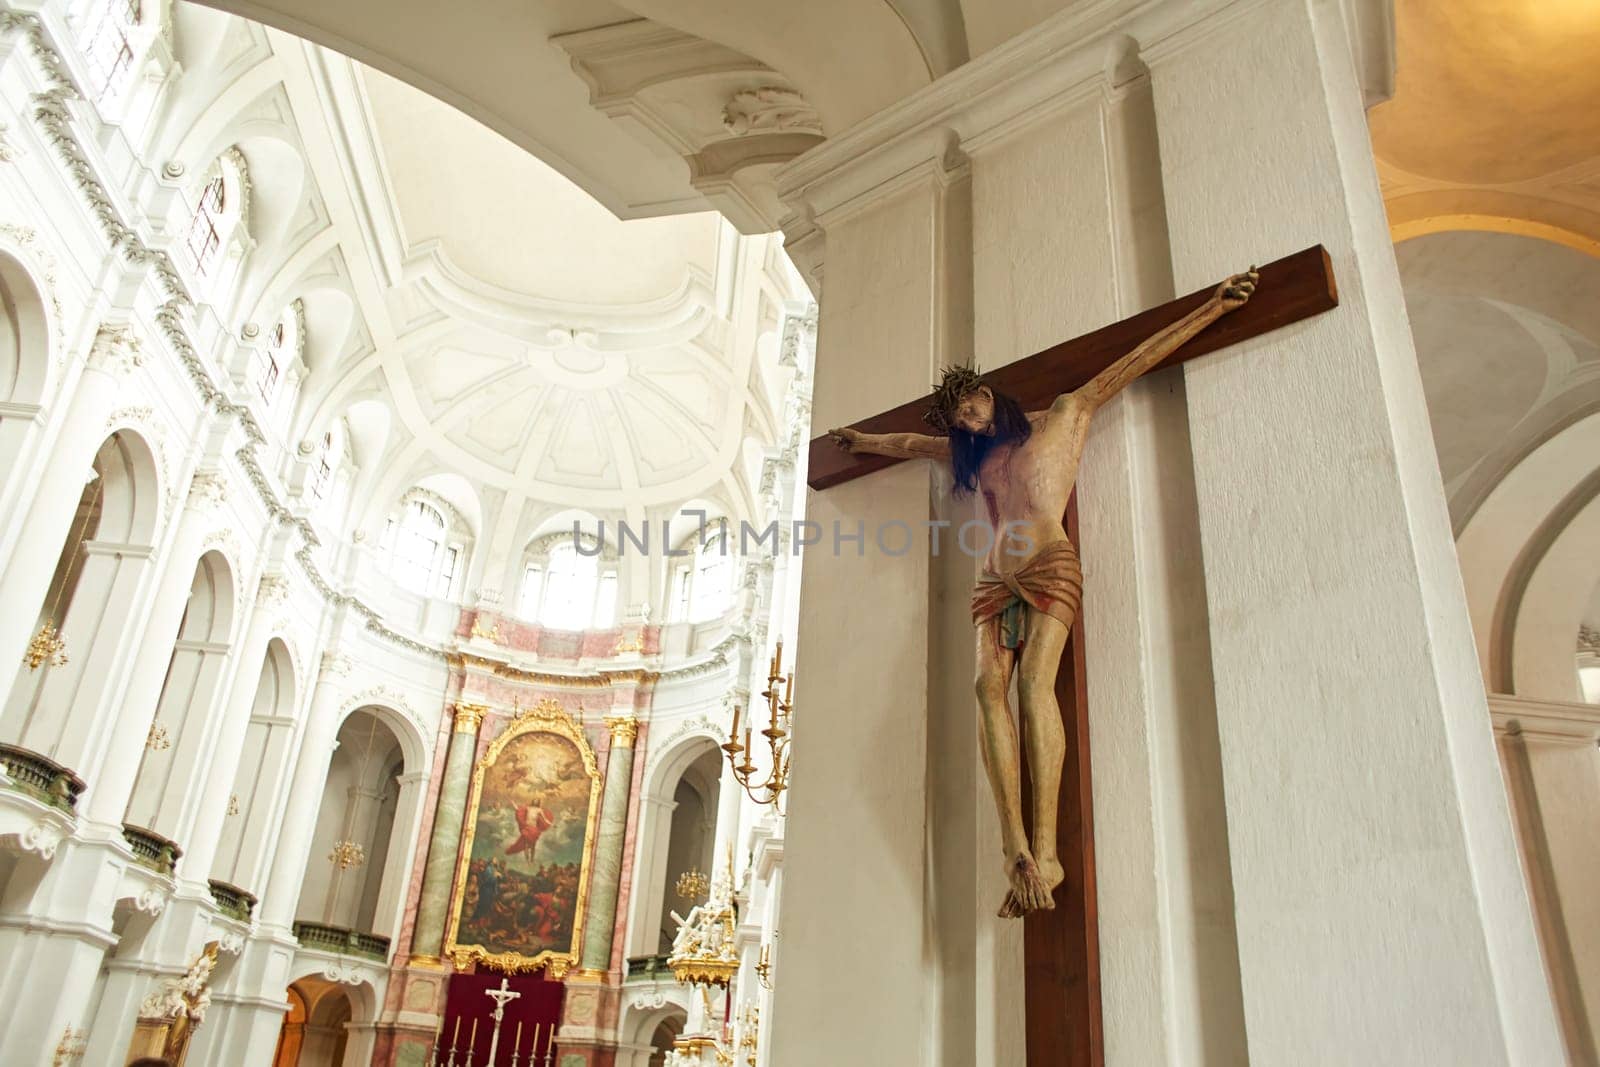 Jesus Christ on the Crucifixion in the Christian Church.